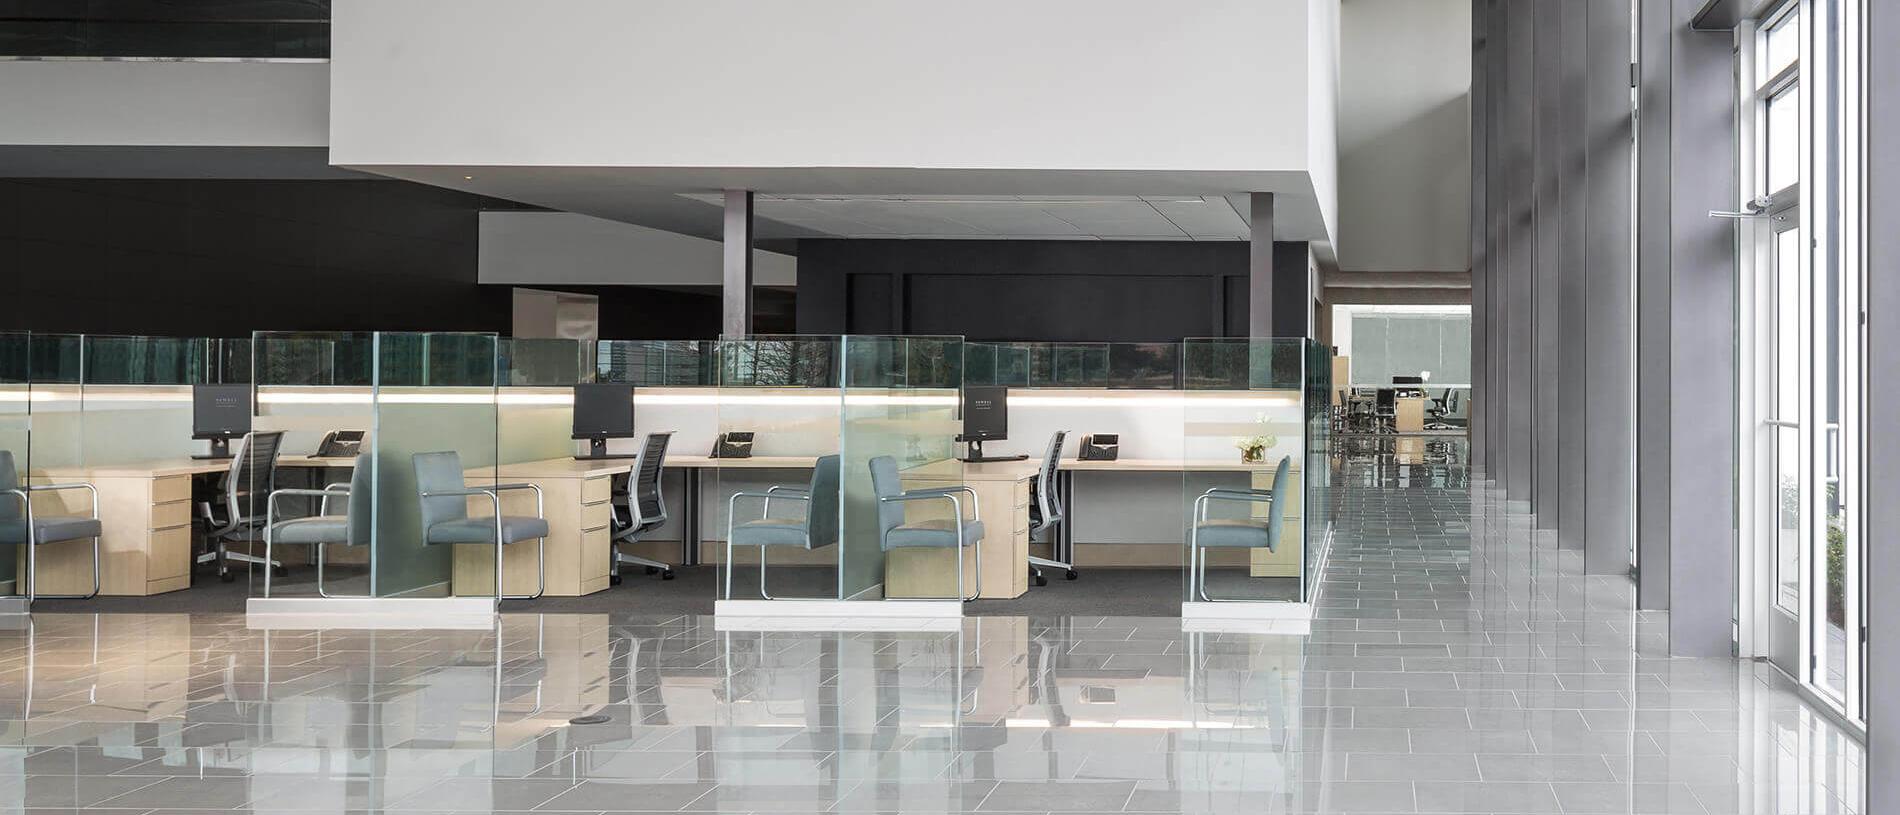 Sewell Mercedes-Benz of West Houston Dealership Interior Photo